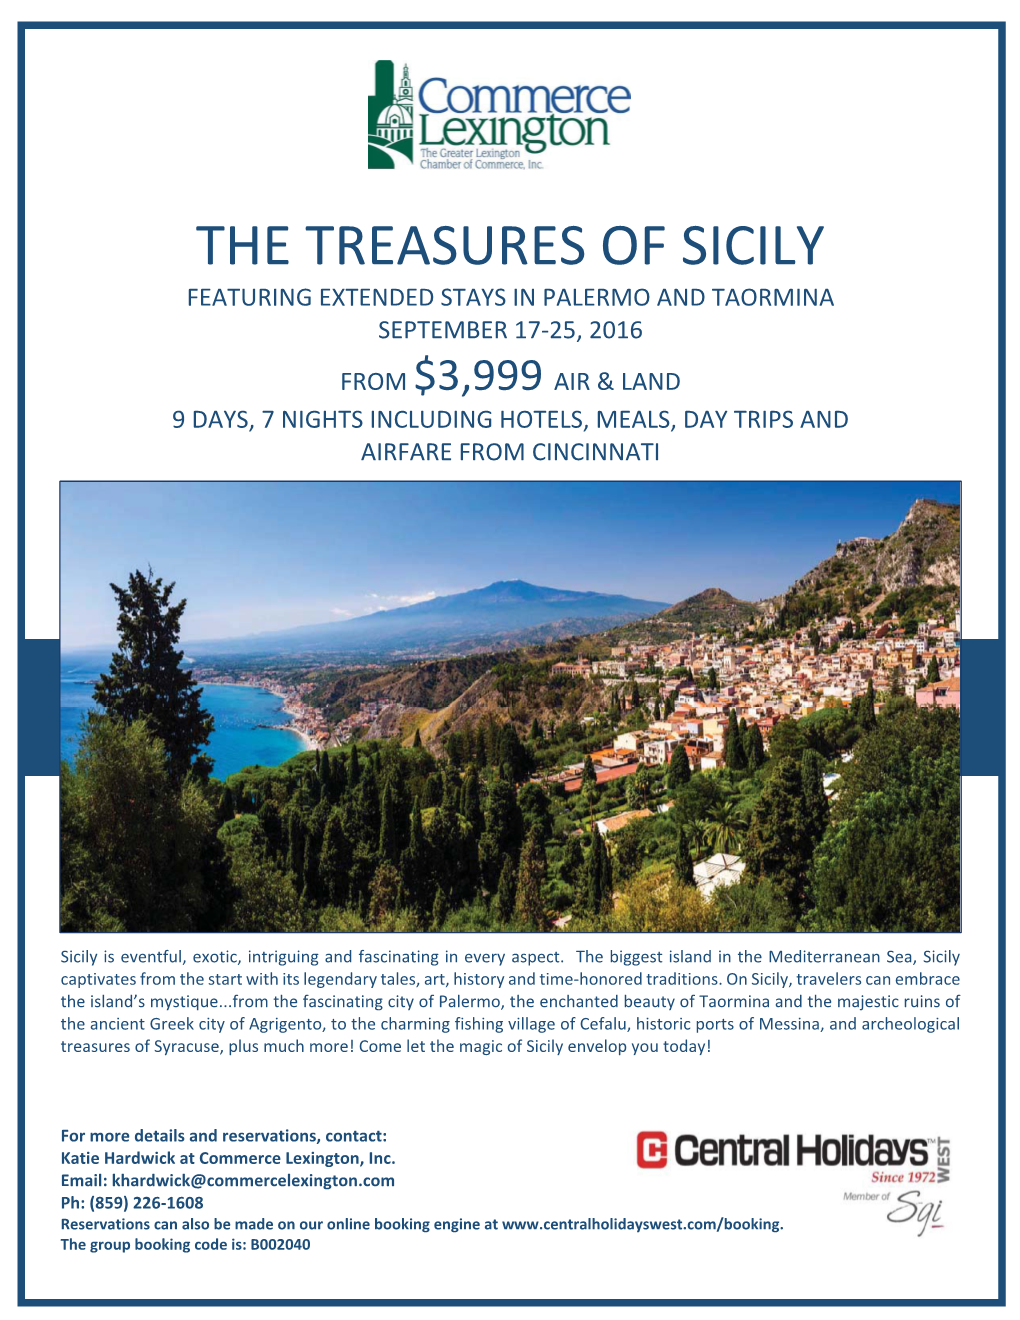 THE TREASURES of SICILY Featuring Extended Stays in Palermo and Taormina